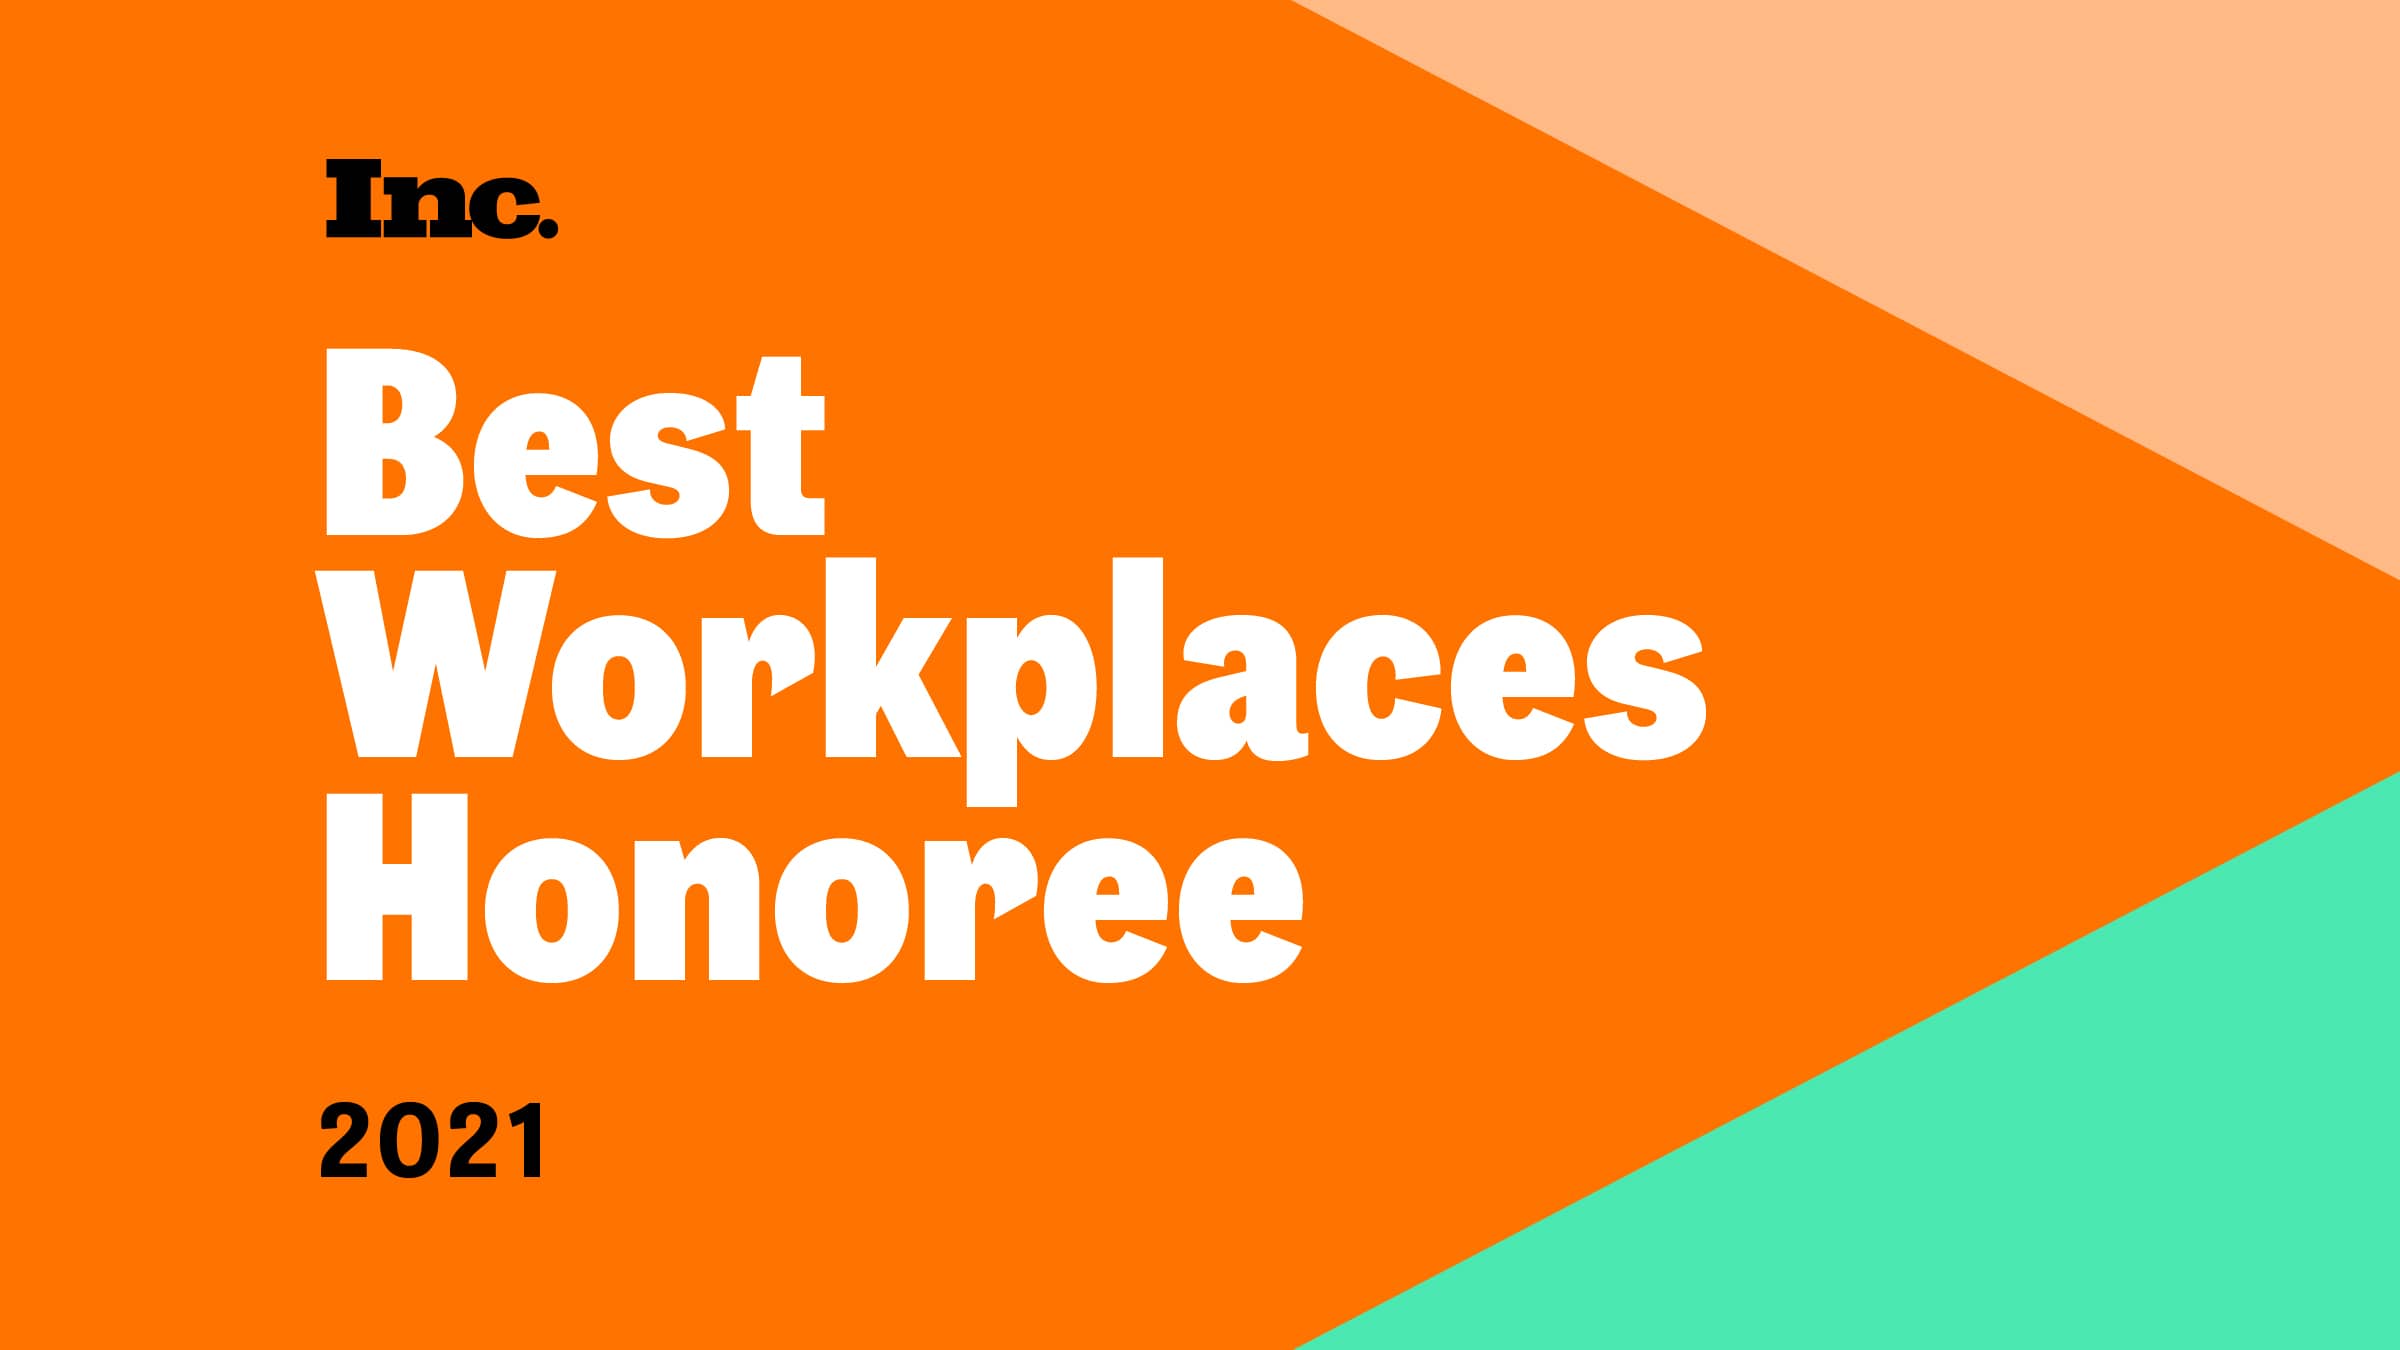 Monte Carlo Named a Best Workplace for 2021 By Inc. Magazine